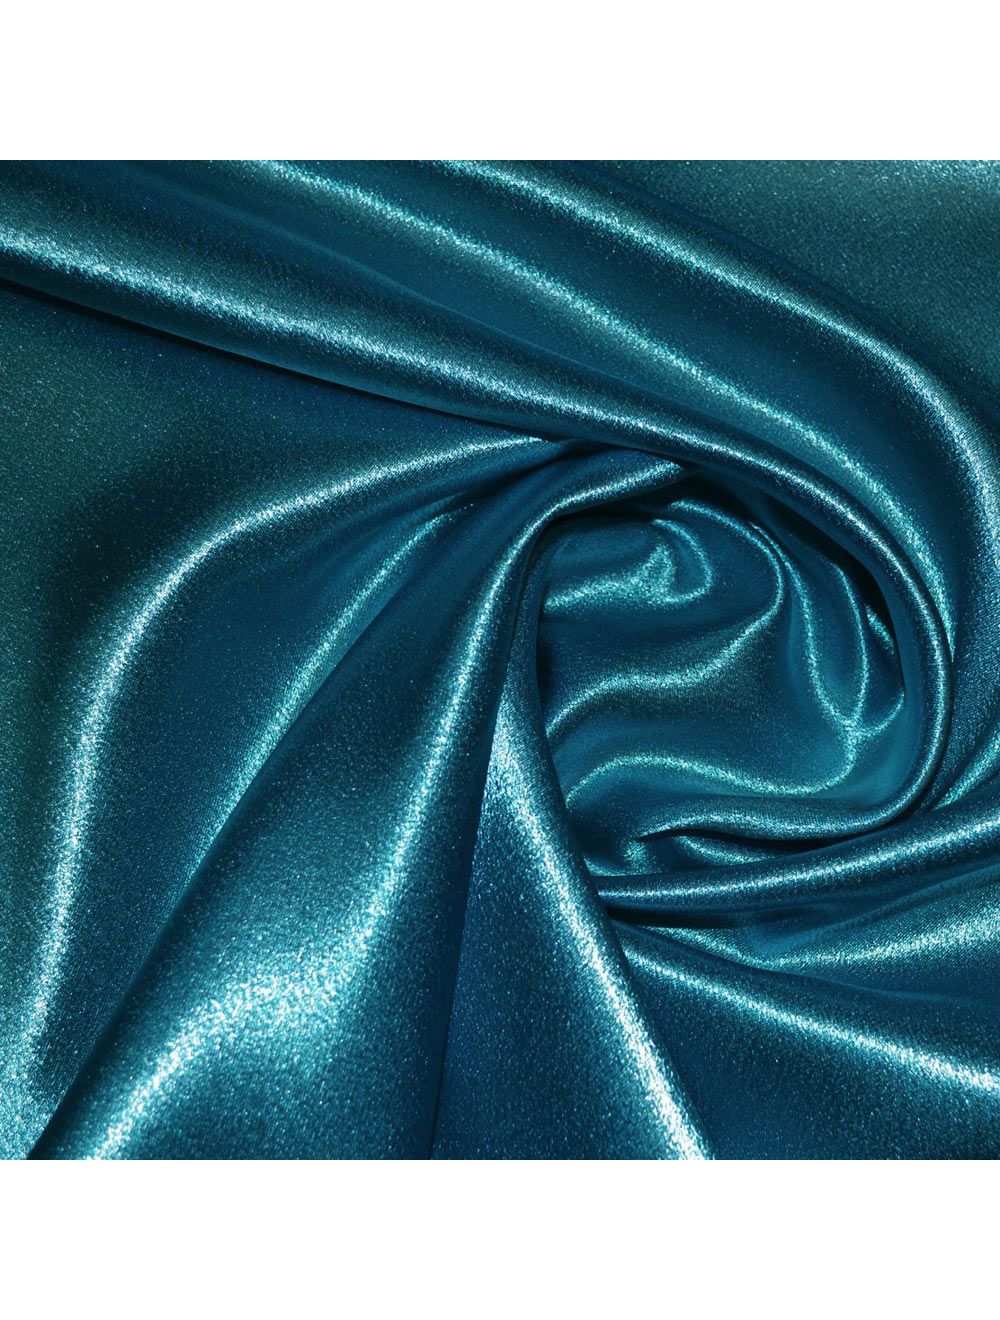 Plain Silky Satin Fabric 50 Turquoise Colours Dress Craft Wedding Crepe Back Material 58